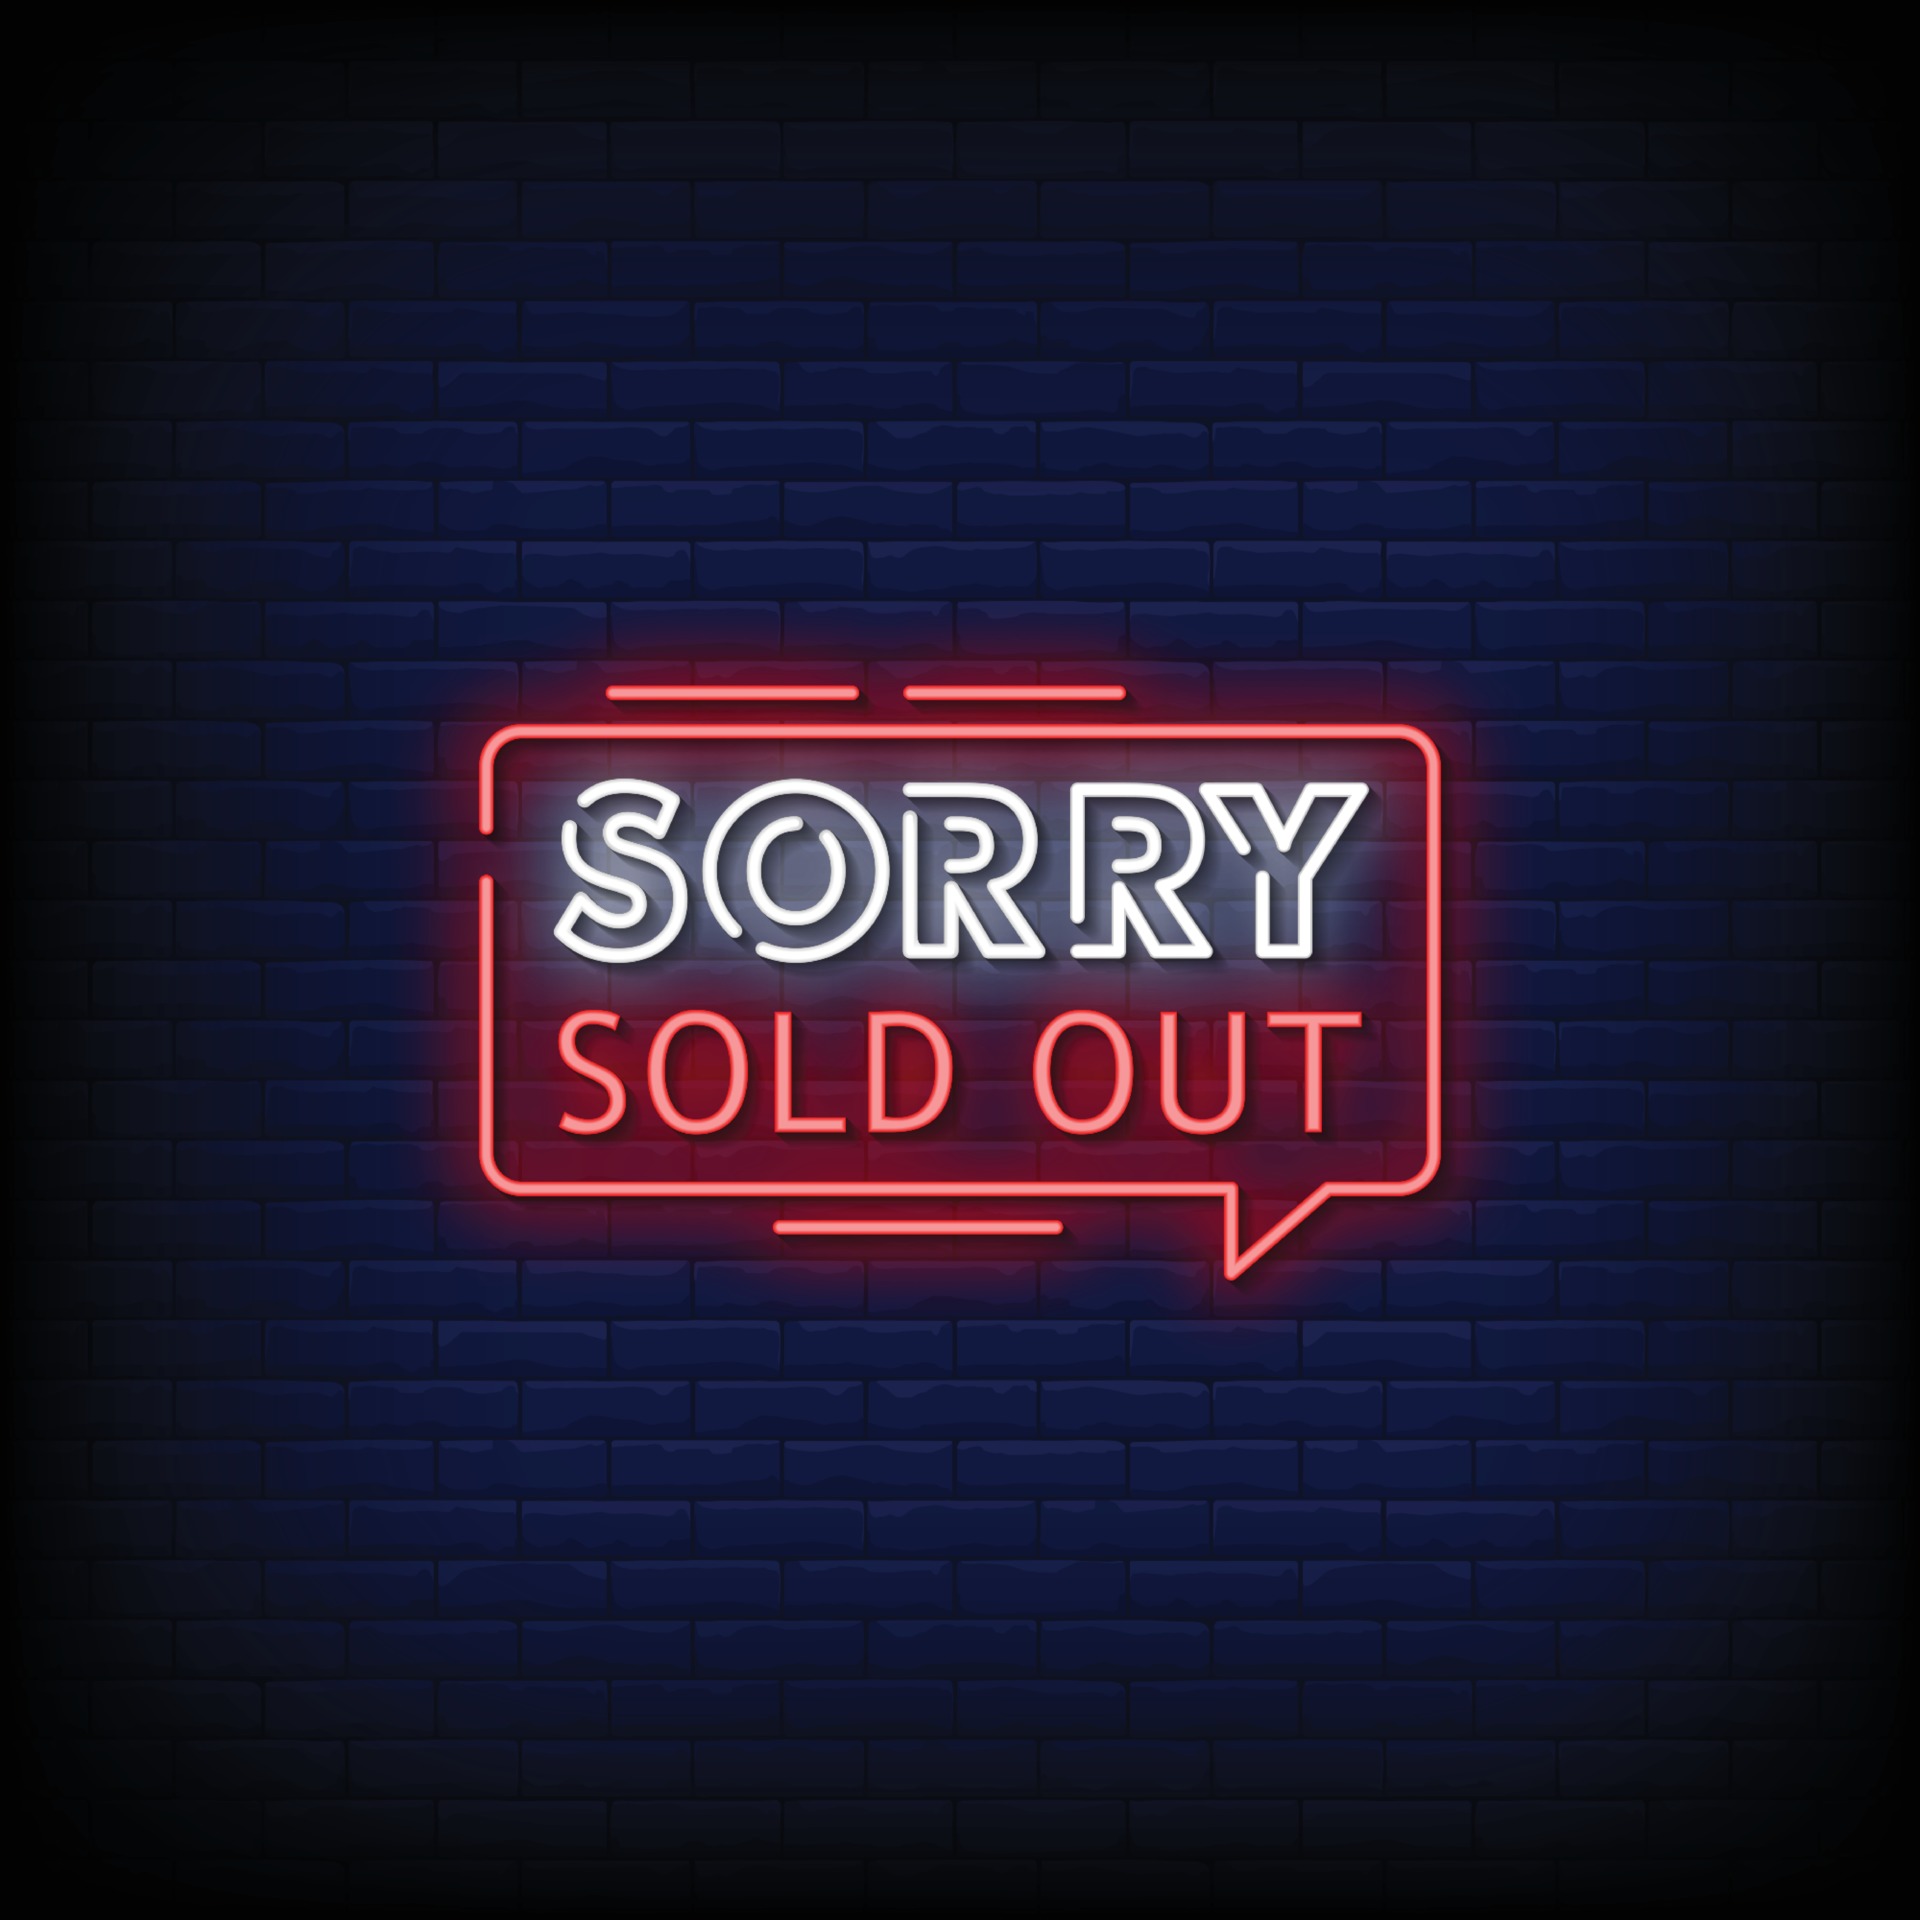 Включи sold out. Sorry sold out. Sold out вывеска. Sold out горо. Sold out фон на телифон.